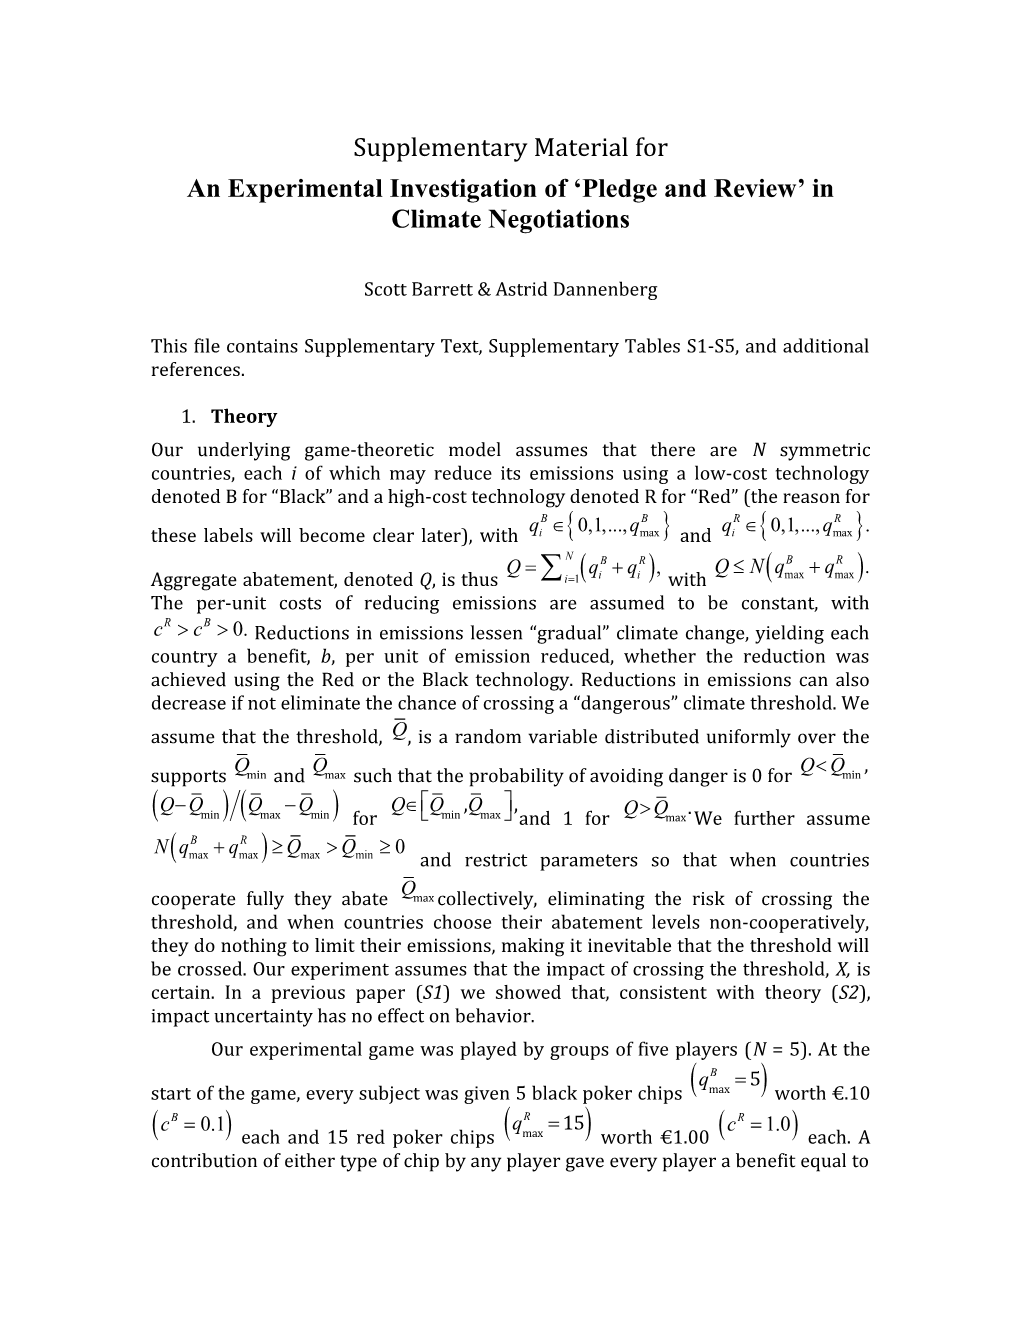 An Experimental Investigation of Pledge and Review in Climate Negotiations